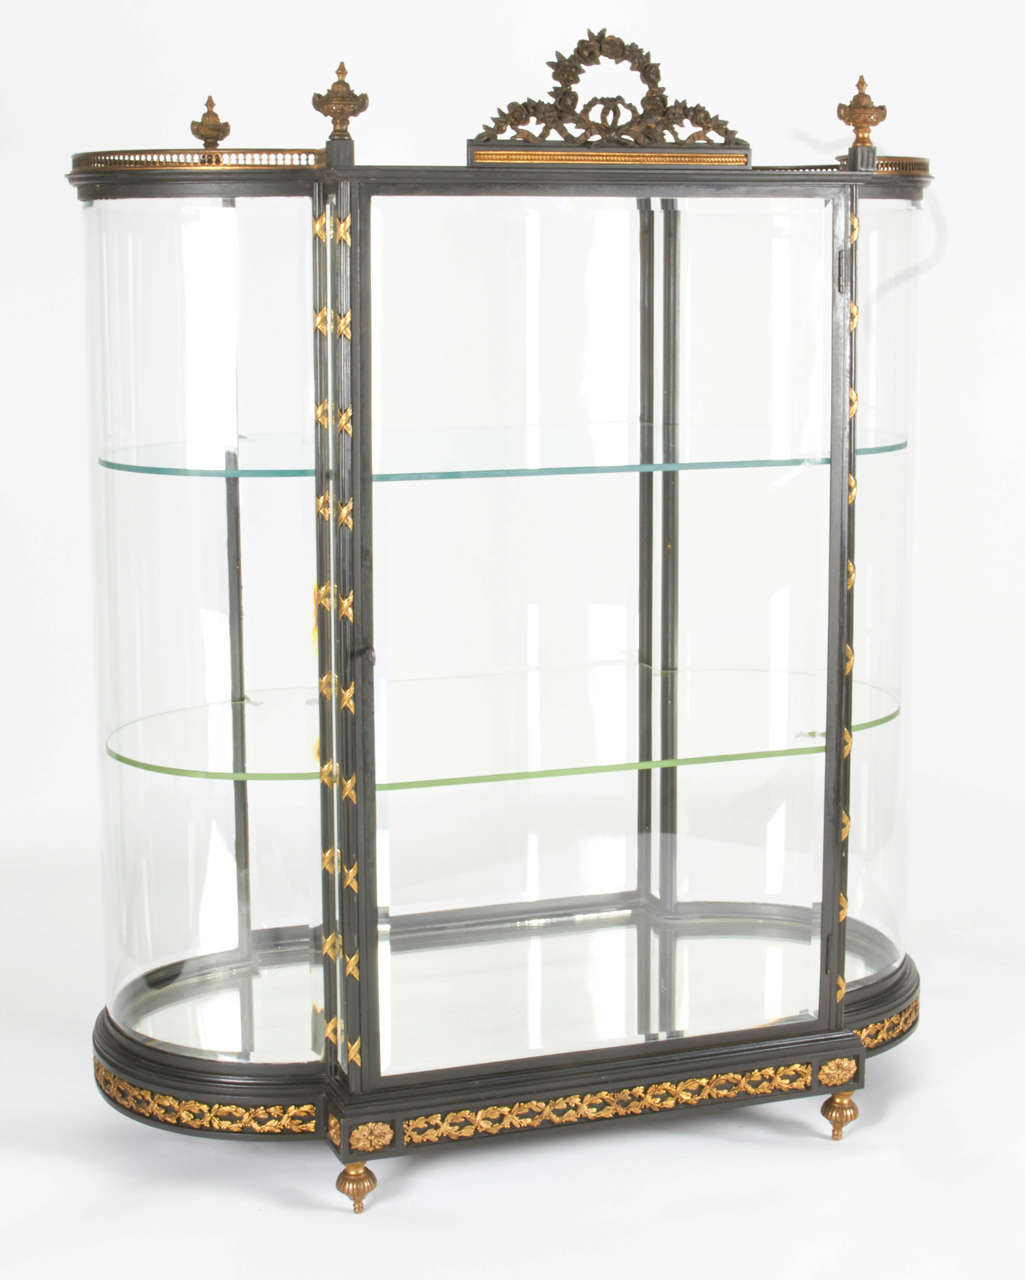 A beautiful antique French gilt bronze, patinated bronze, steel and glass jewelry vitrine or showcase, Paris, circa 1890-1910. It is very unusual to see these vitrines having the original curved glass, all bevelled after over 100 years, with